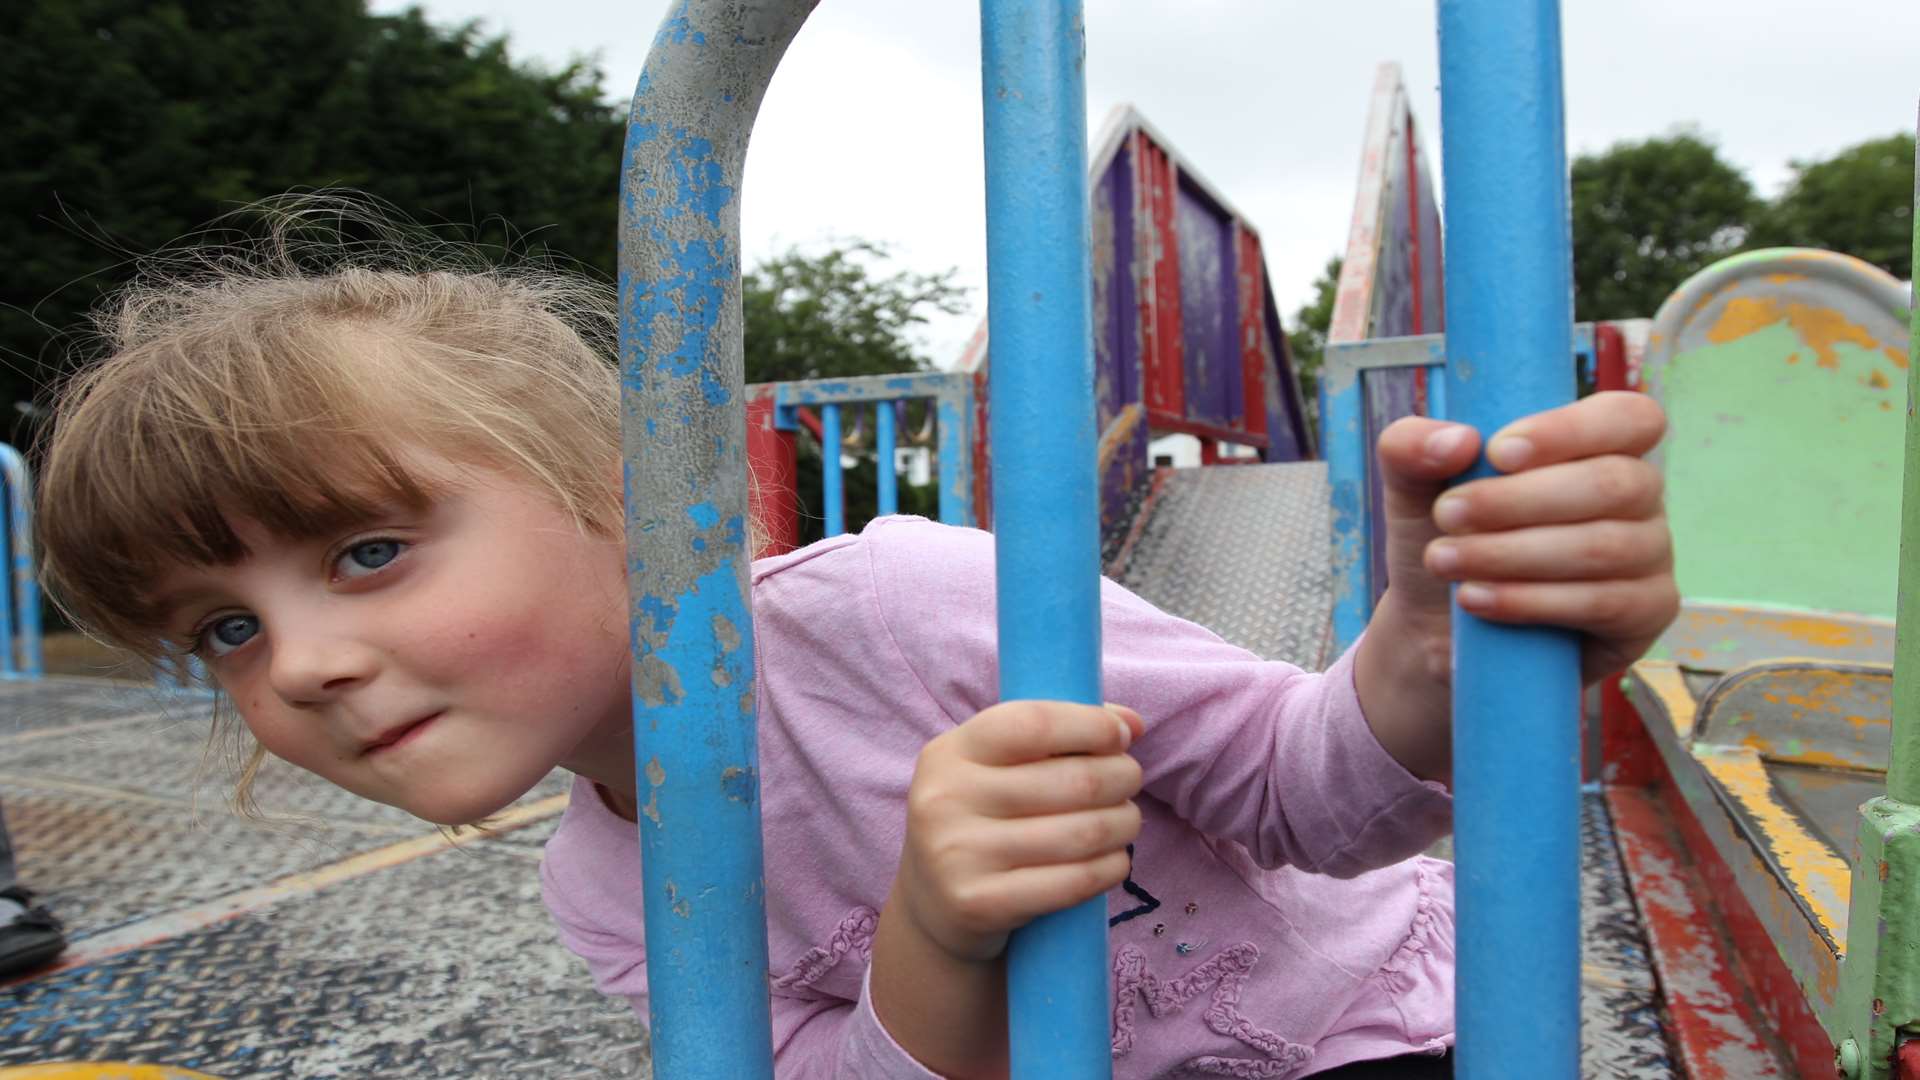 Lilly Westrip, four, on the playground in Woodlands Park, Gravesend